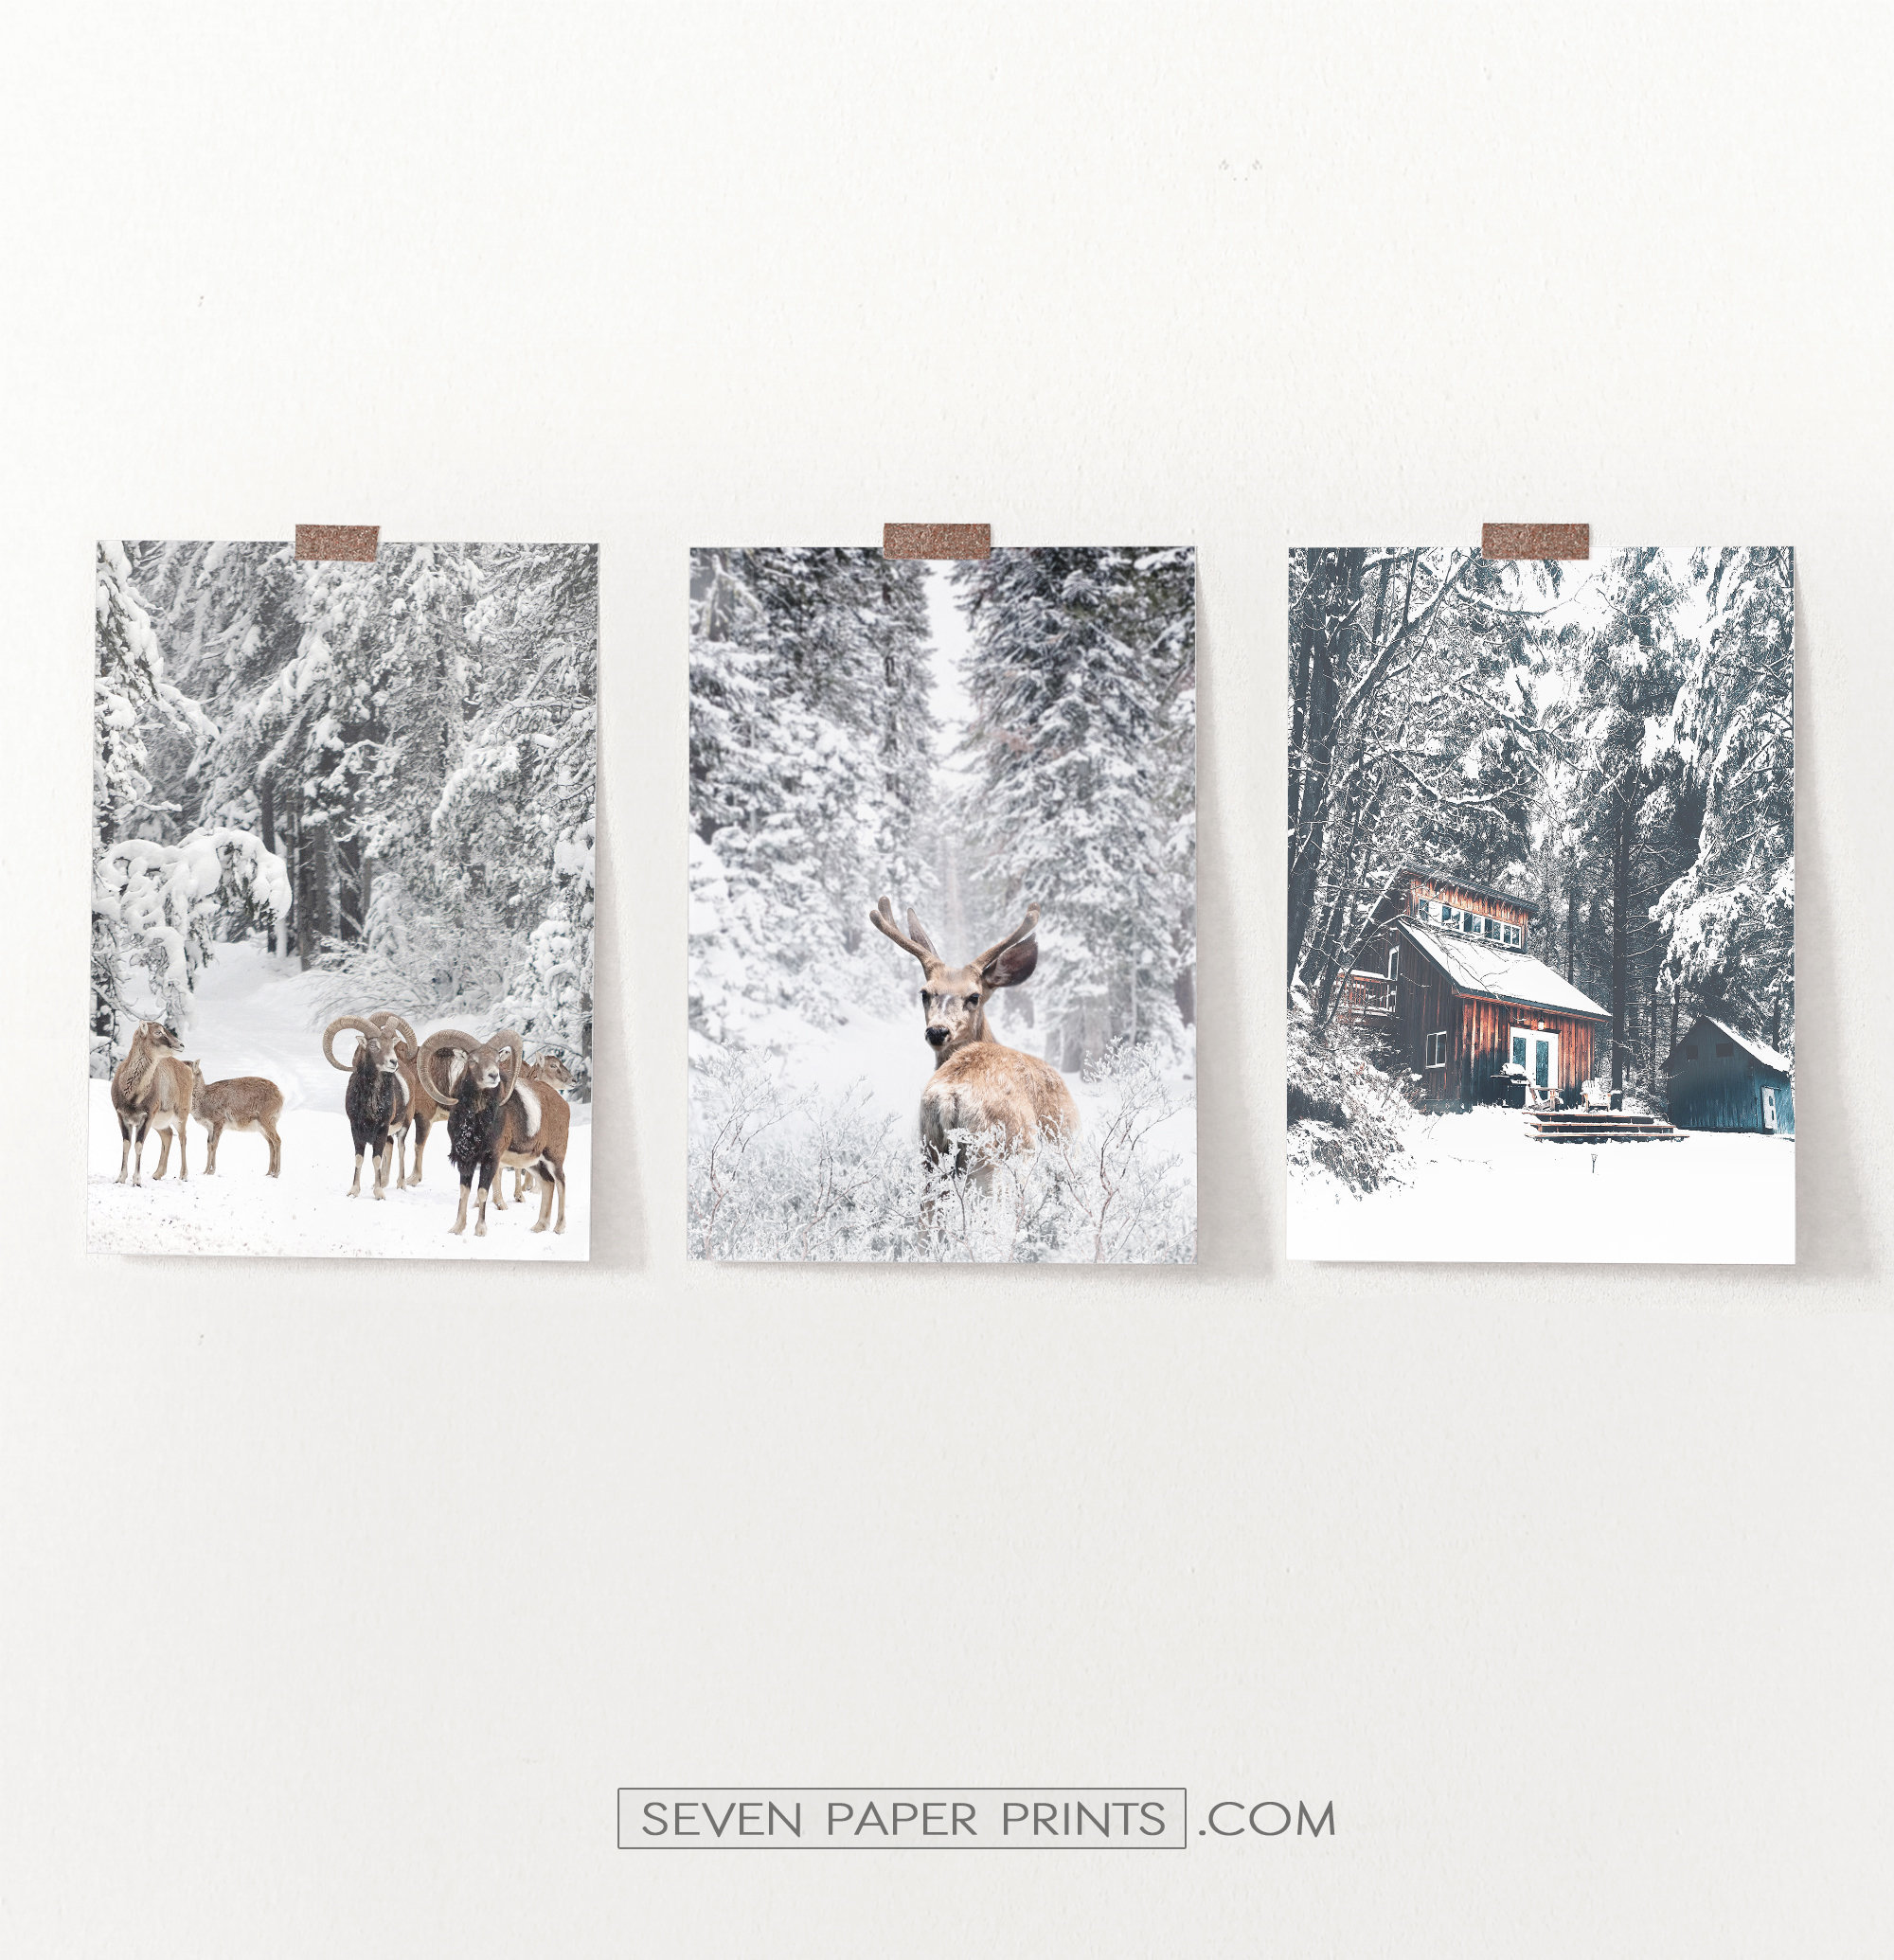 Giclee Set Of 3 Large Winter Prints, Christmas Wall Art Dcor, Holidays Docer For Walls, Prints With Deer, Rams, Cabin